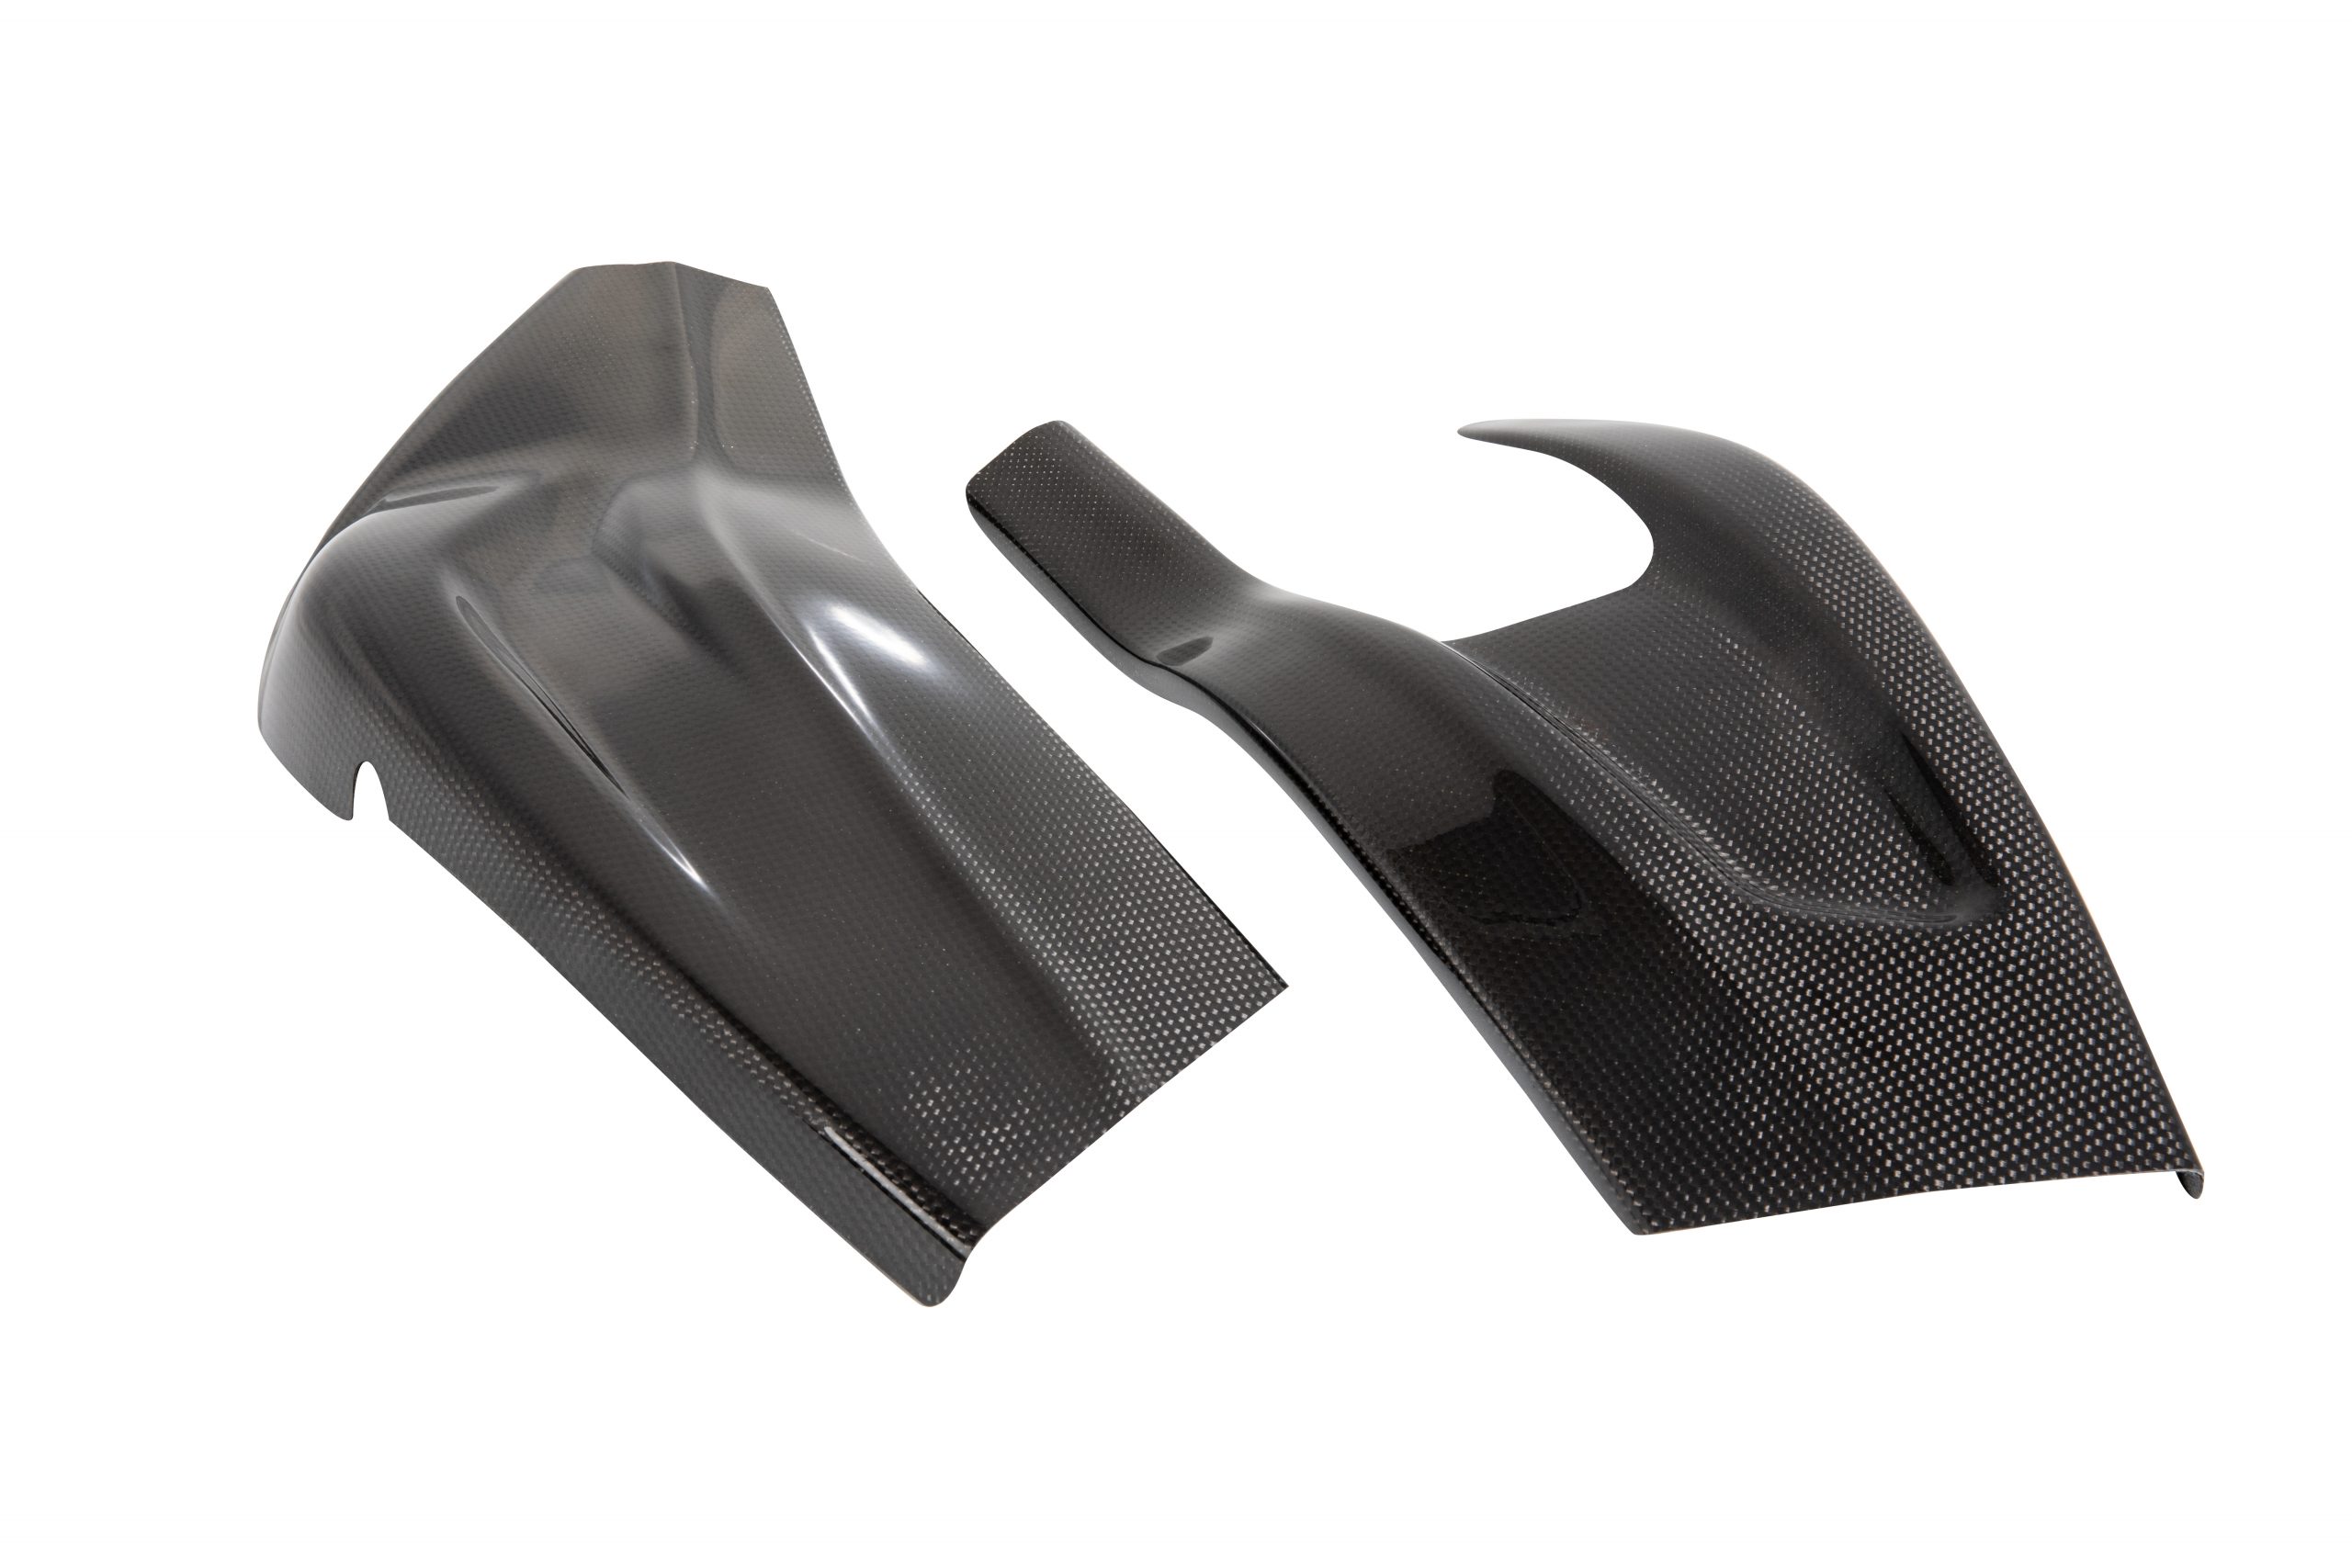 ARM PROTECTIONS BMW S1000R (17-19)